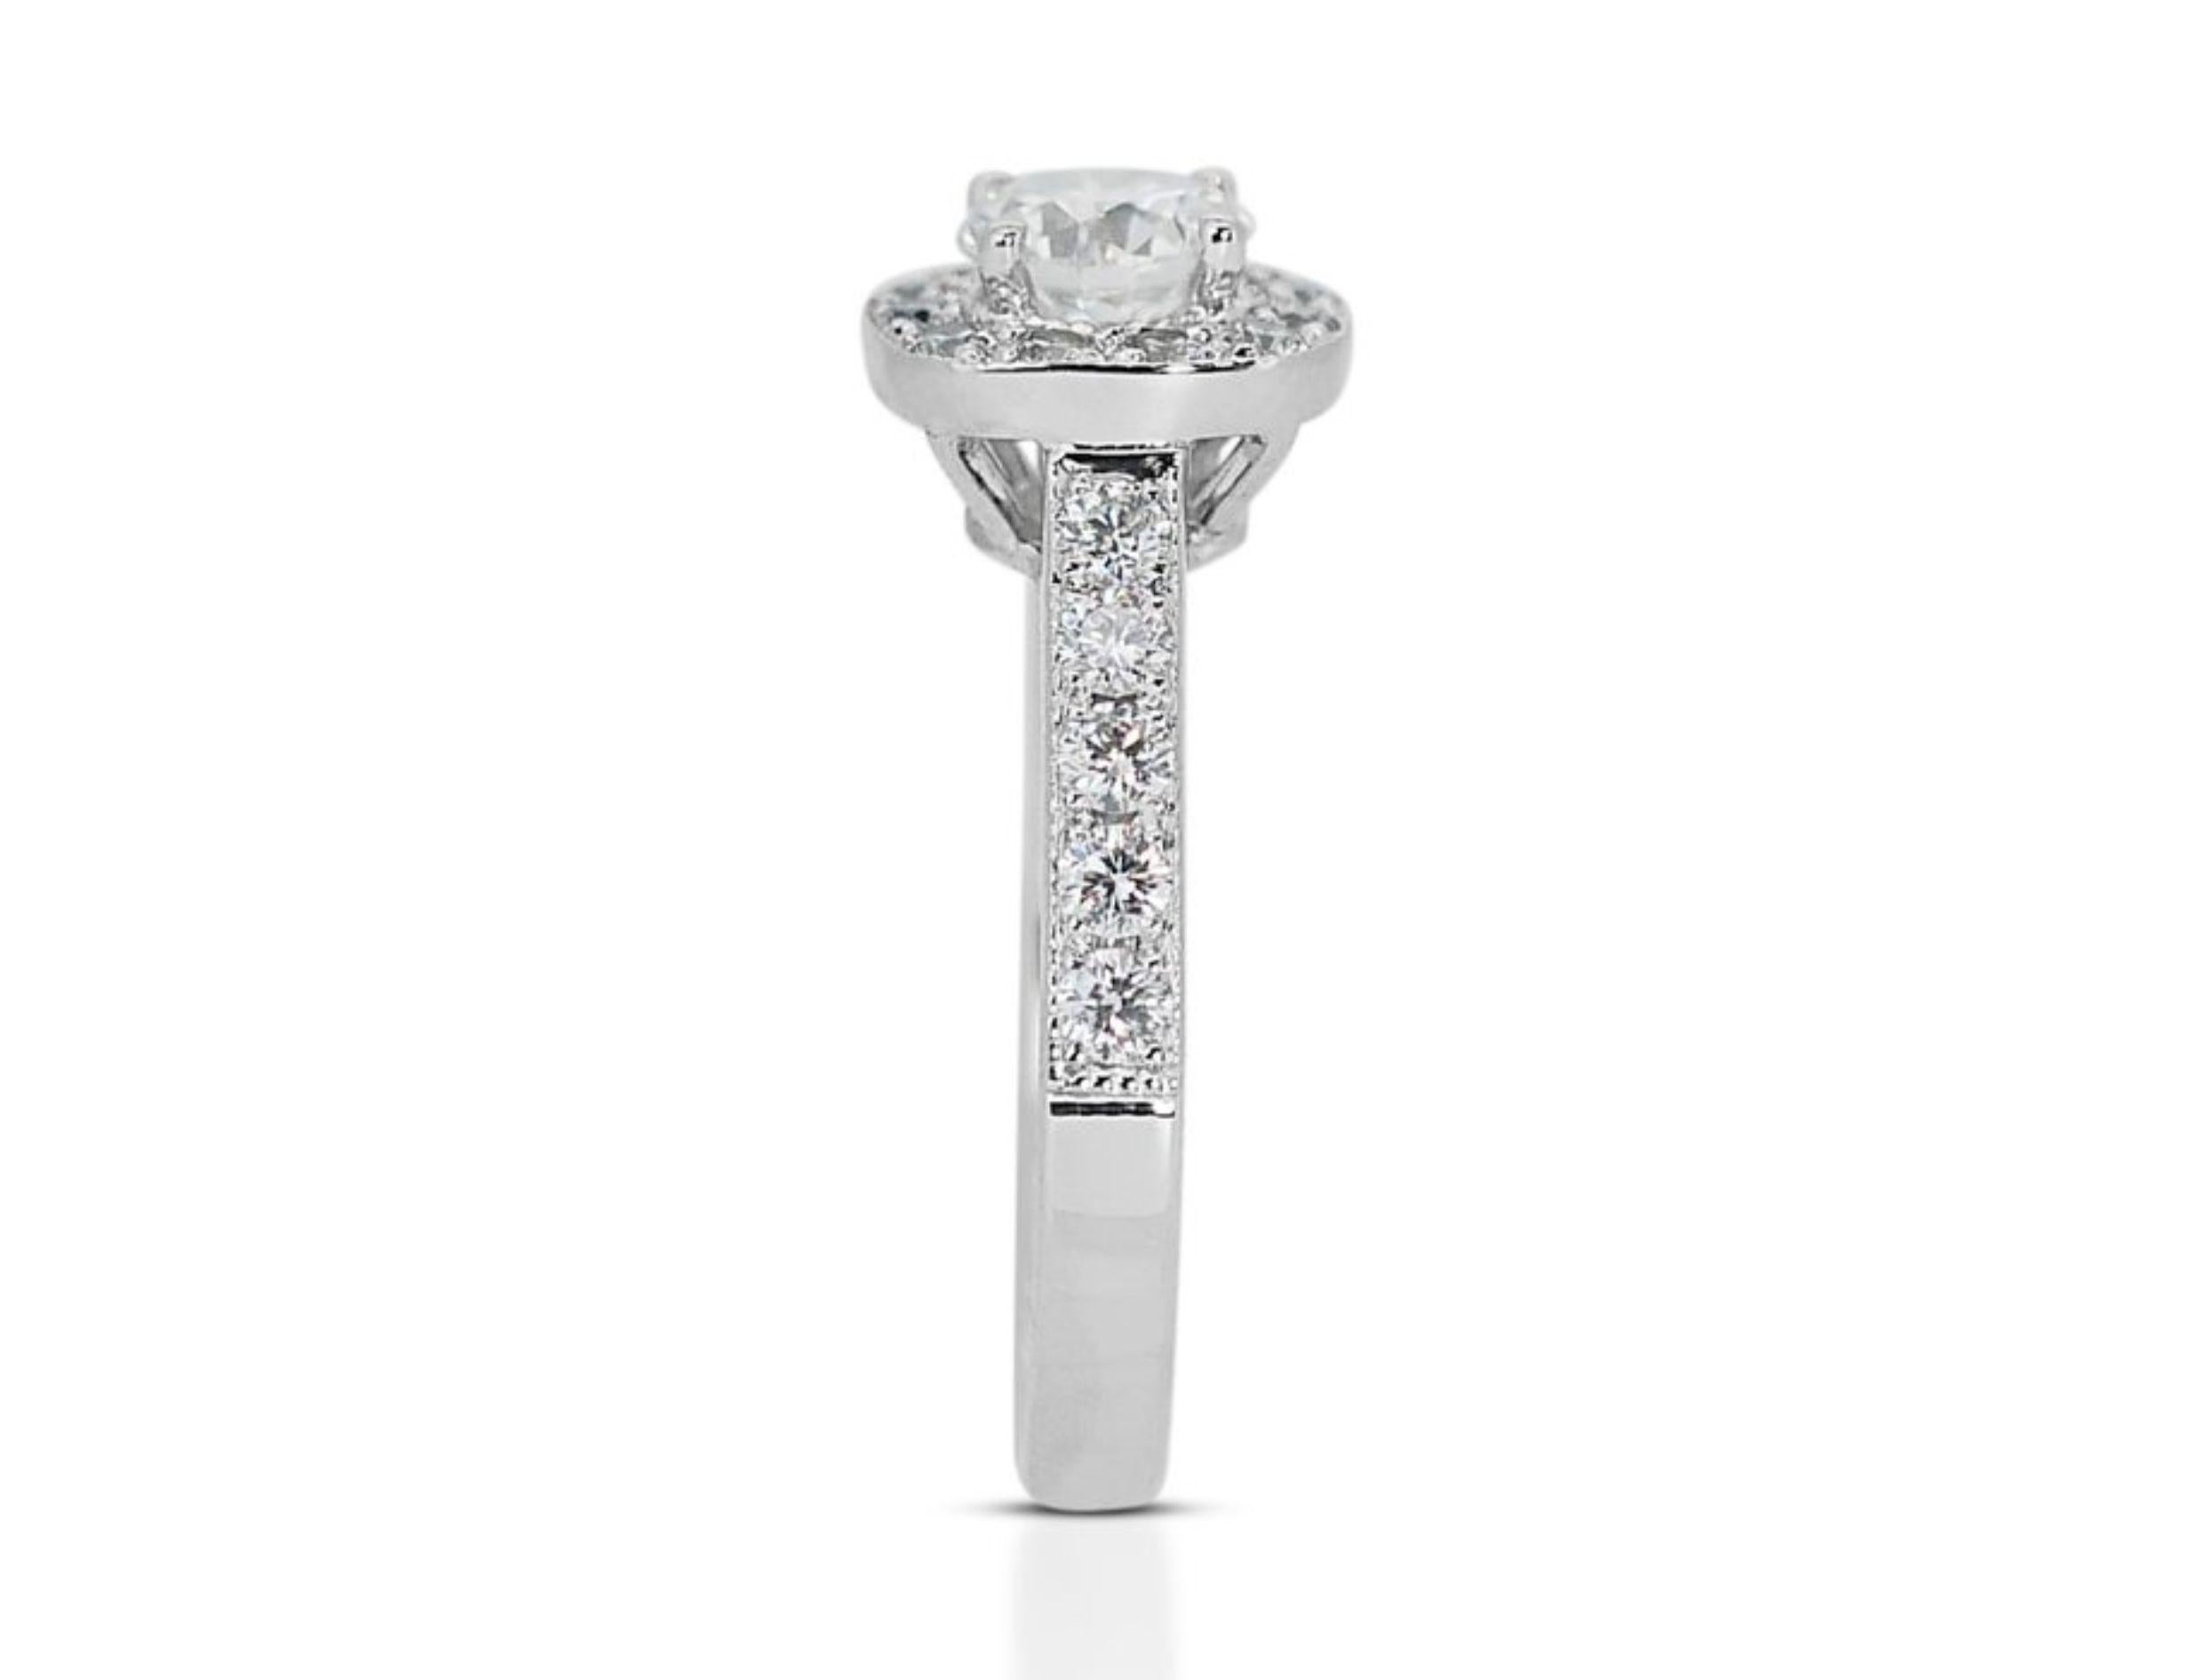 Captivating 0.52ct Pave Diamond Ring set in 18K White Gold For Sale 1